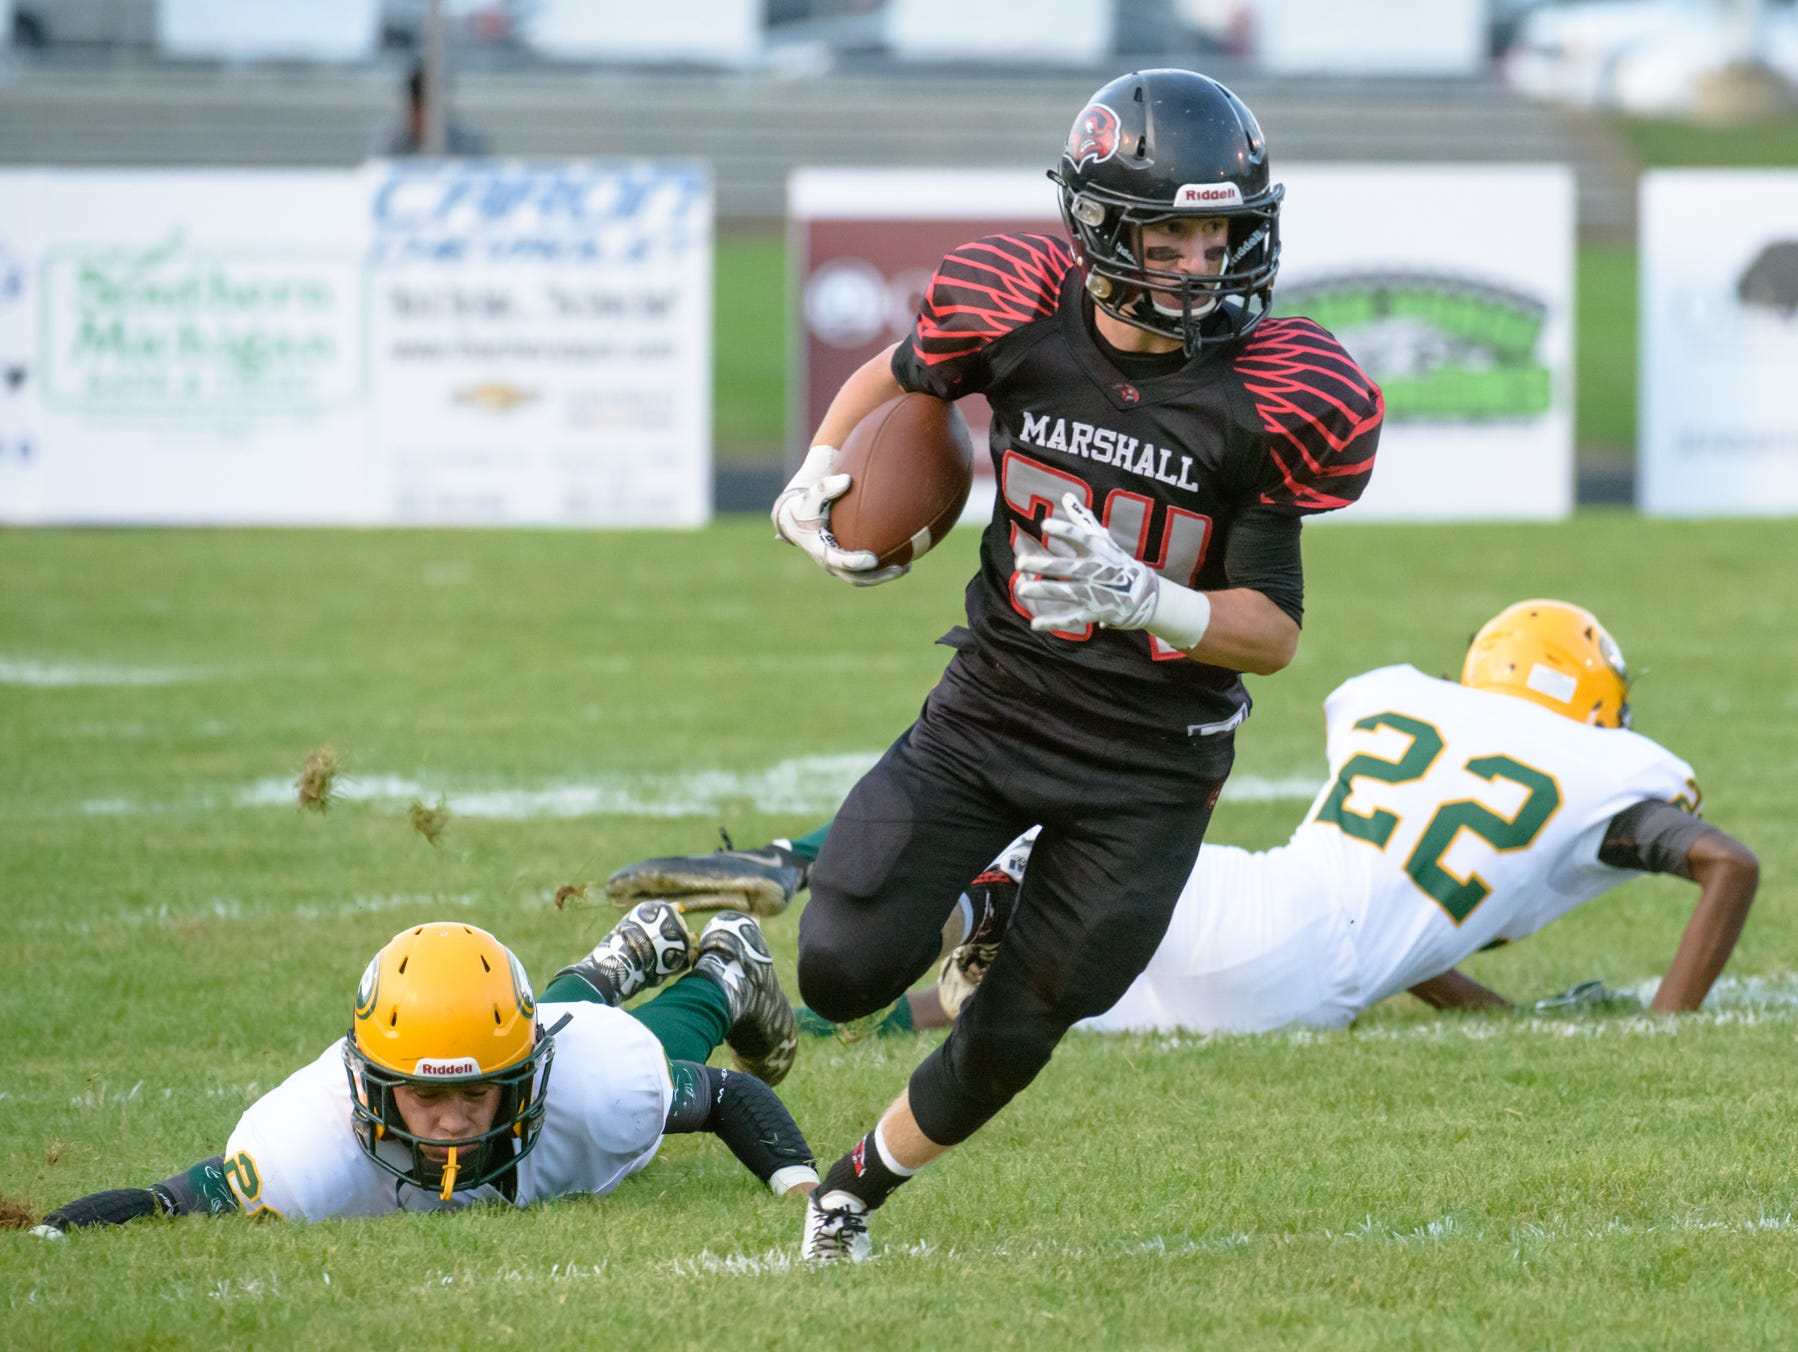 Marshall Brad Feasel had 257 yards in a 45-0 win over Jackson Northwest earlier this season.